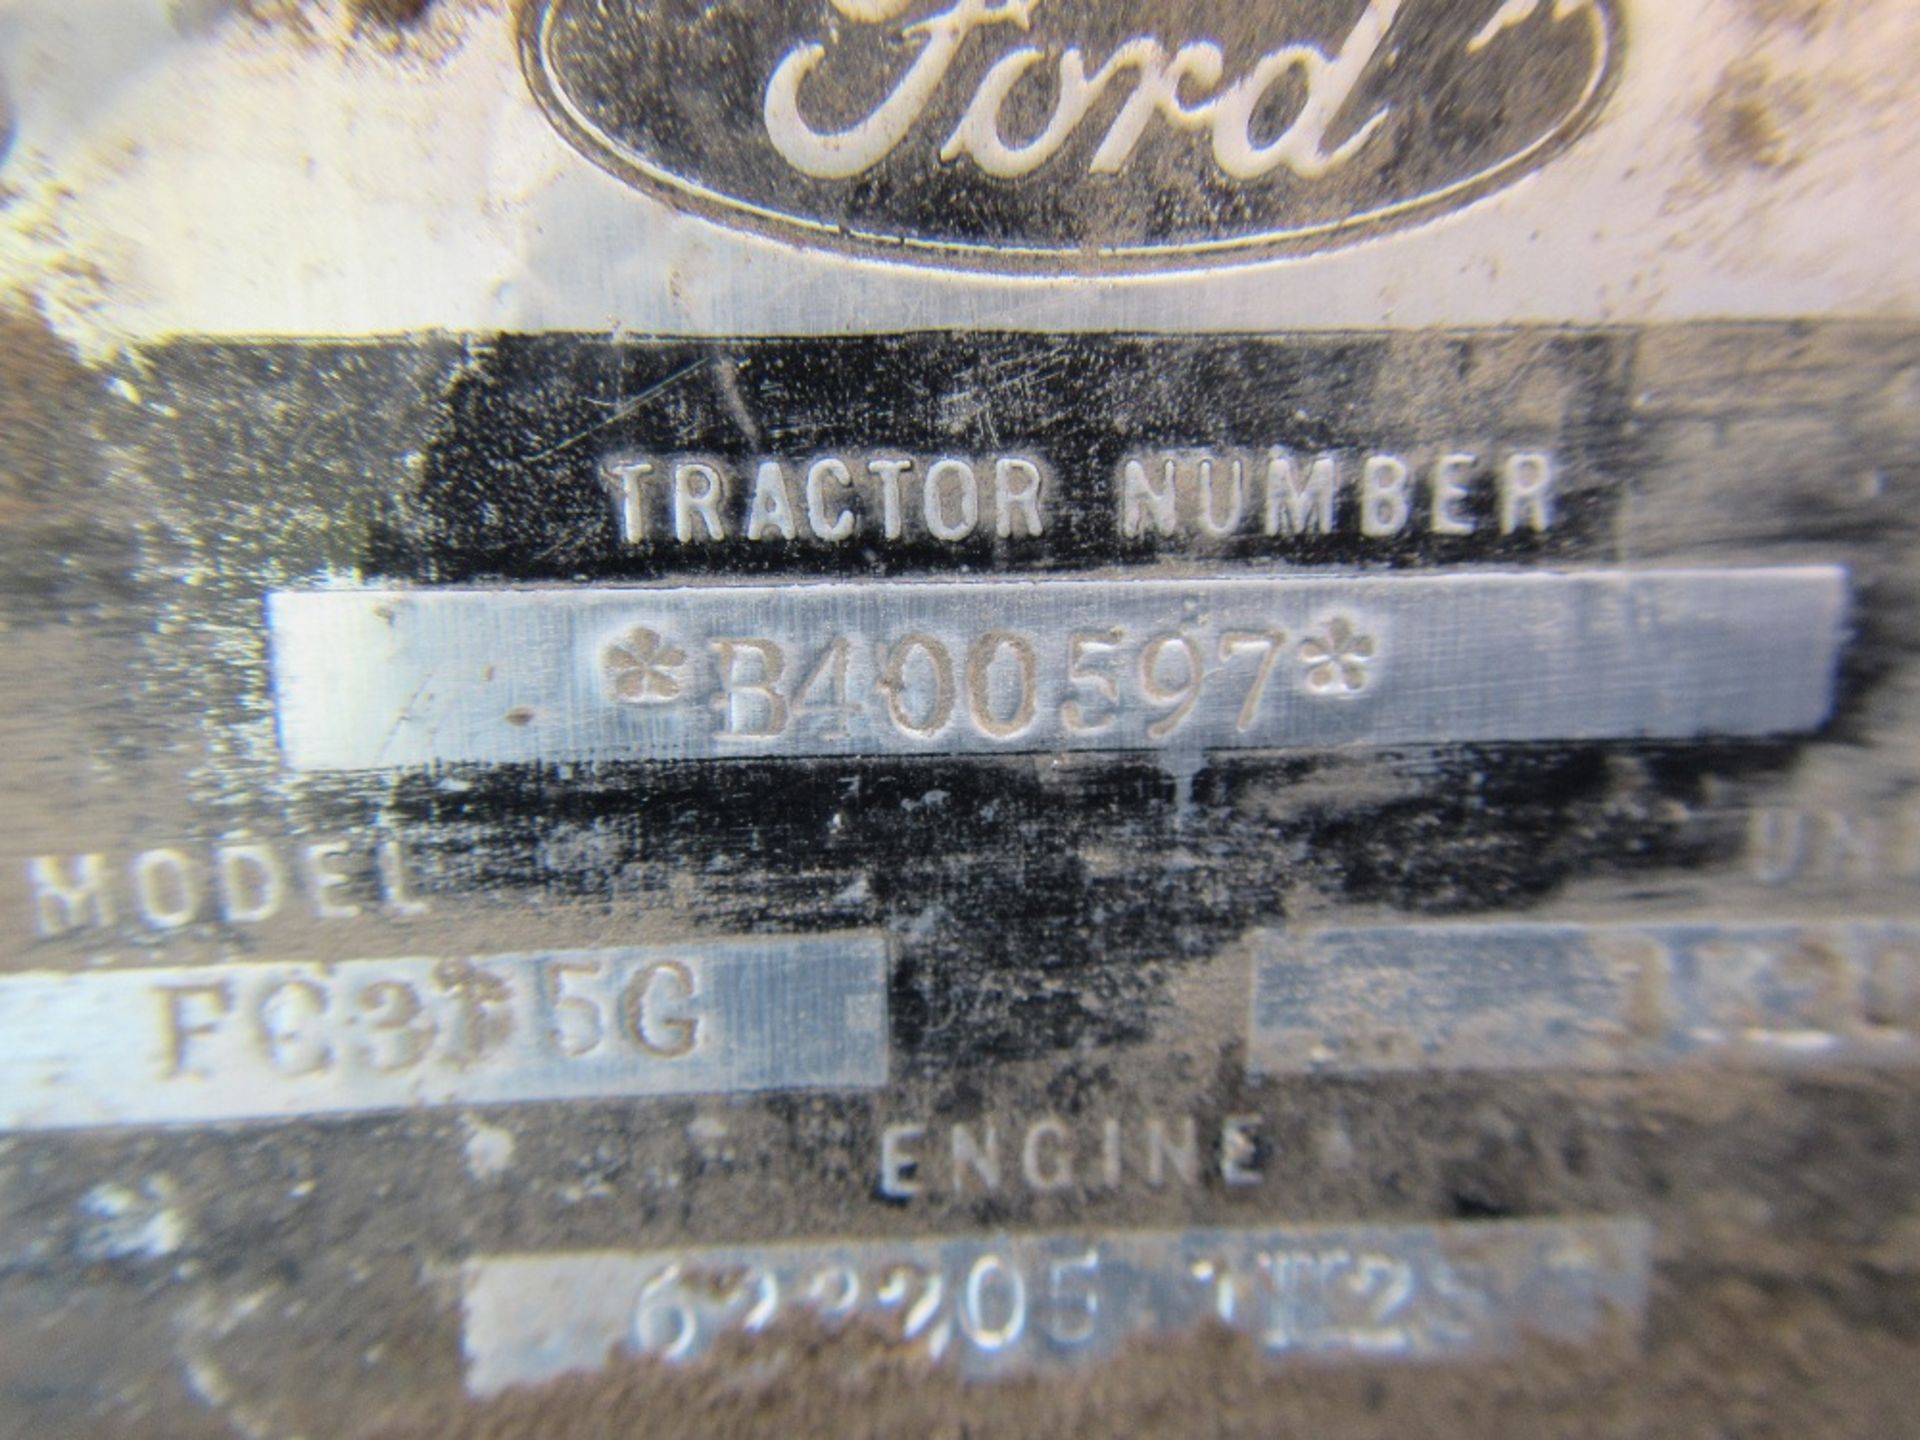 Ford 7710 2wd Tractor Ser. No. B400597 - Image 17 of 17